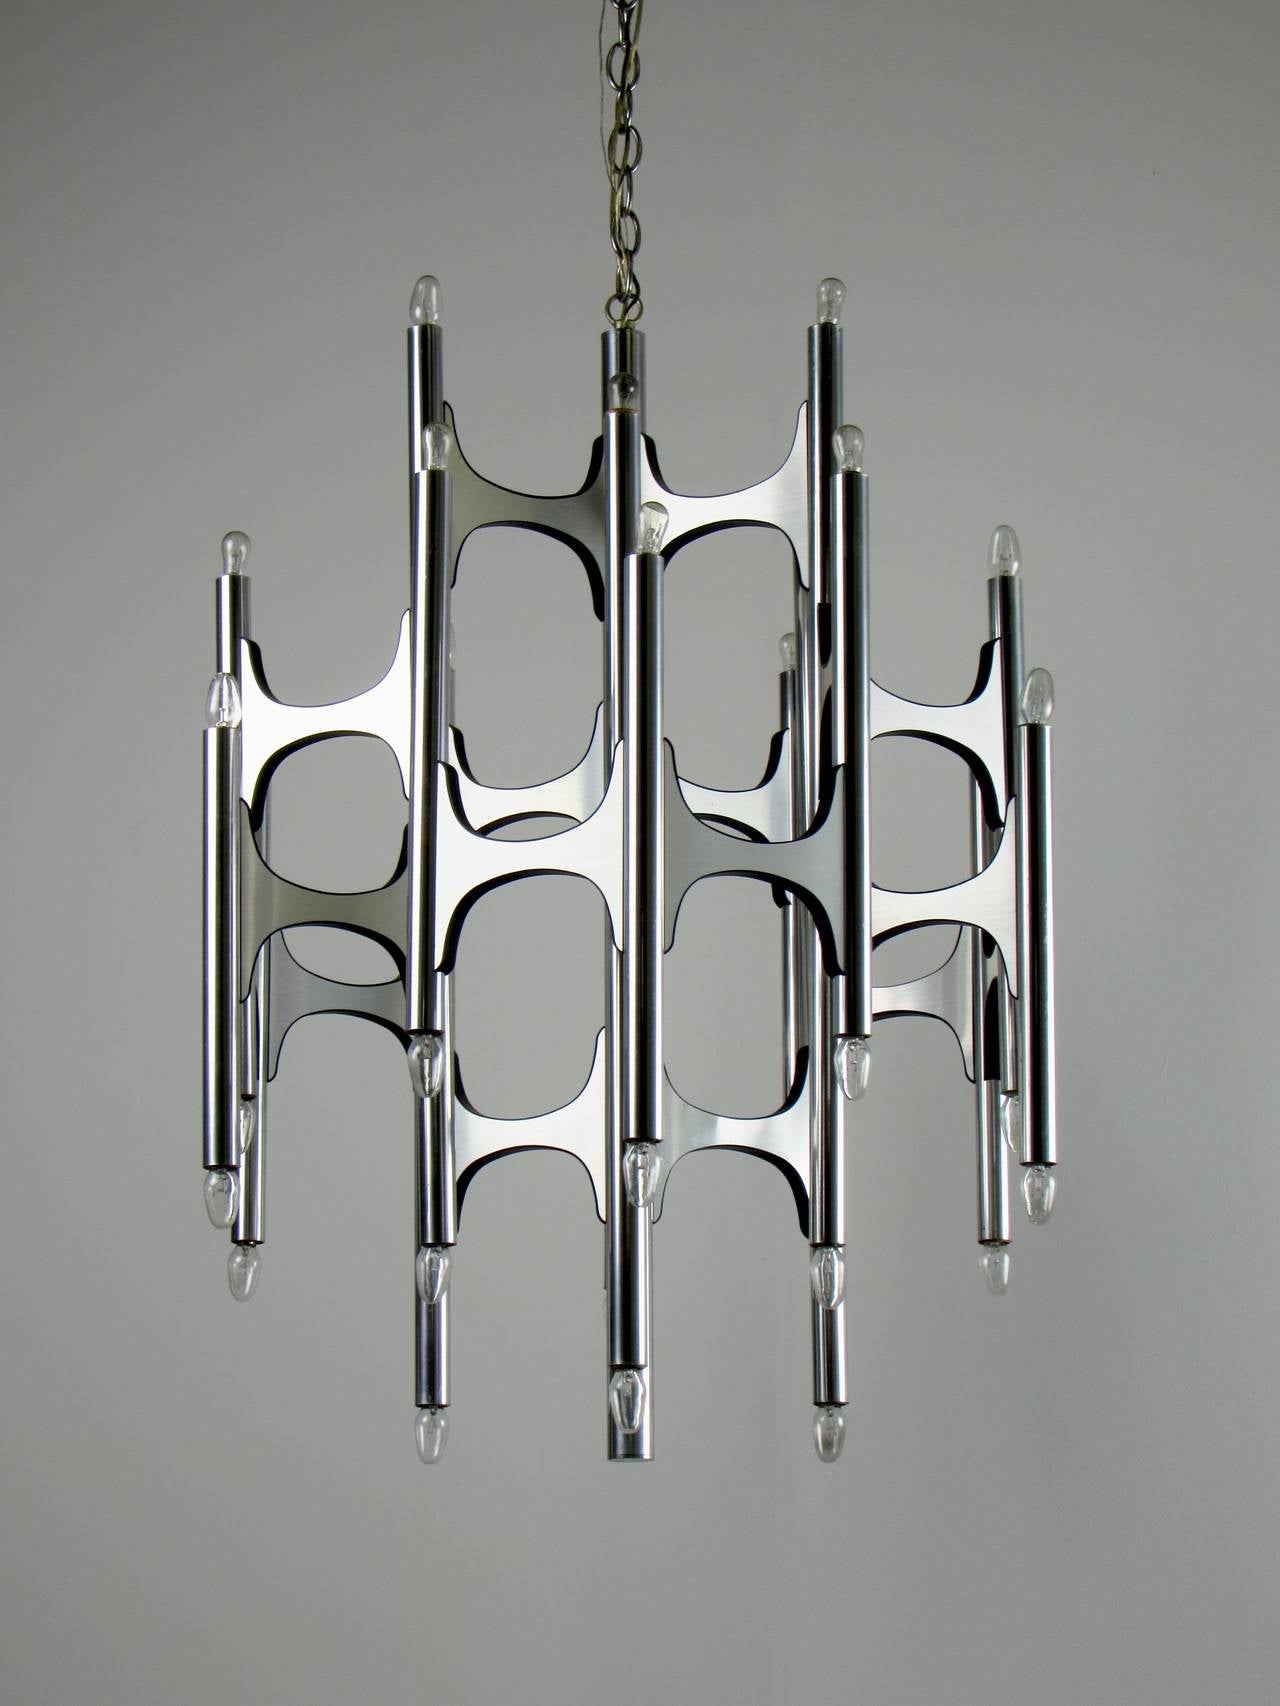 Incredible Brutalist 36 bulb chrome chandelier by Gaetano Sciolari, 1970s. Composed of mirror polished tubes with brushed bowtie-like connectors. Impeccable vintage condition with very little wear.

We offer free regular deliveries to NYC and